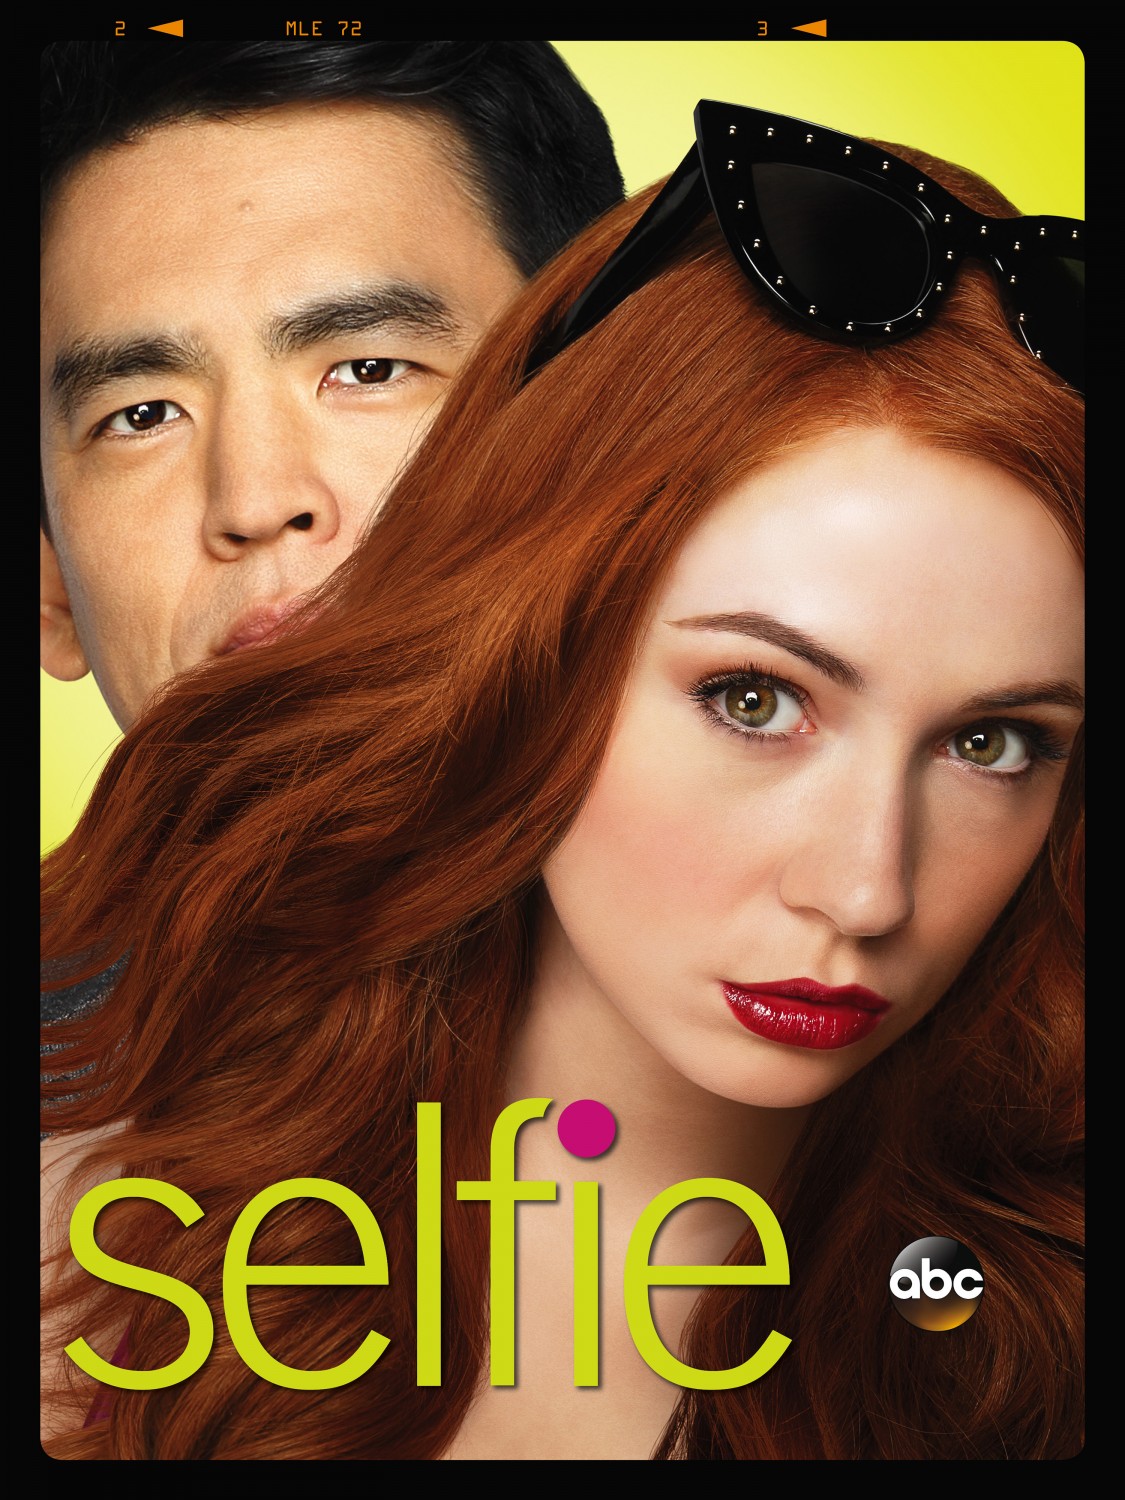 Extra Large TV Poster Image for Selfie 